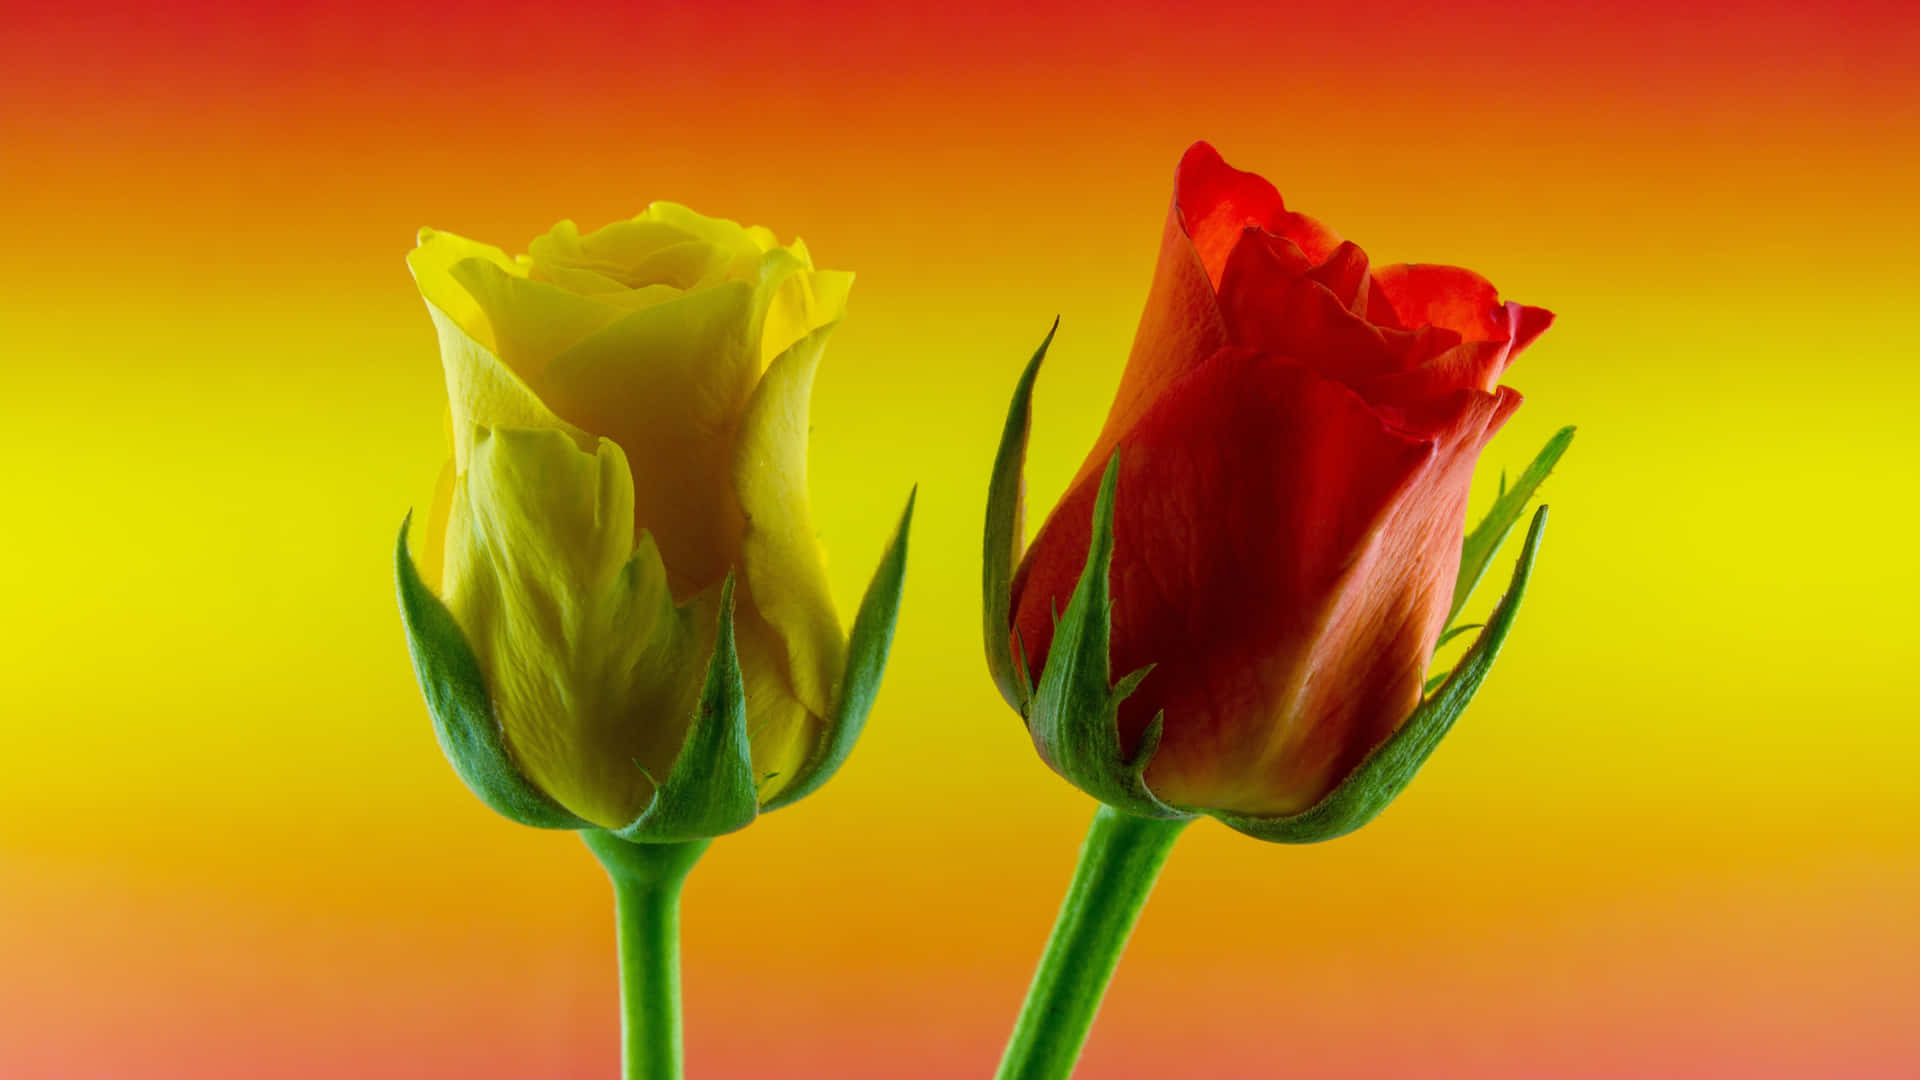 1440p Yellow And Red Roses Background